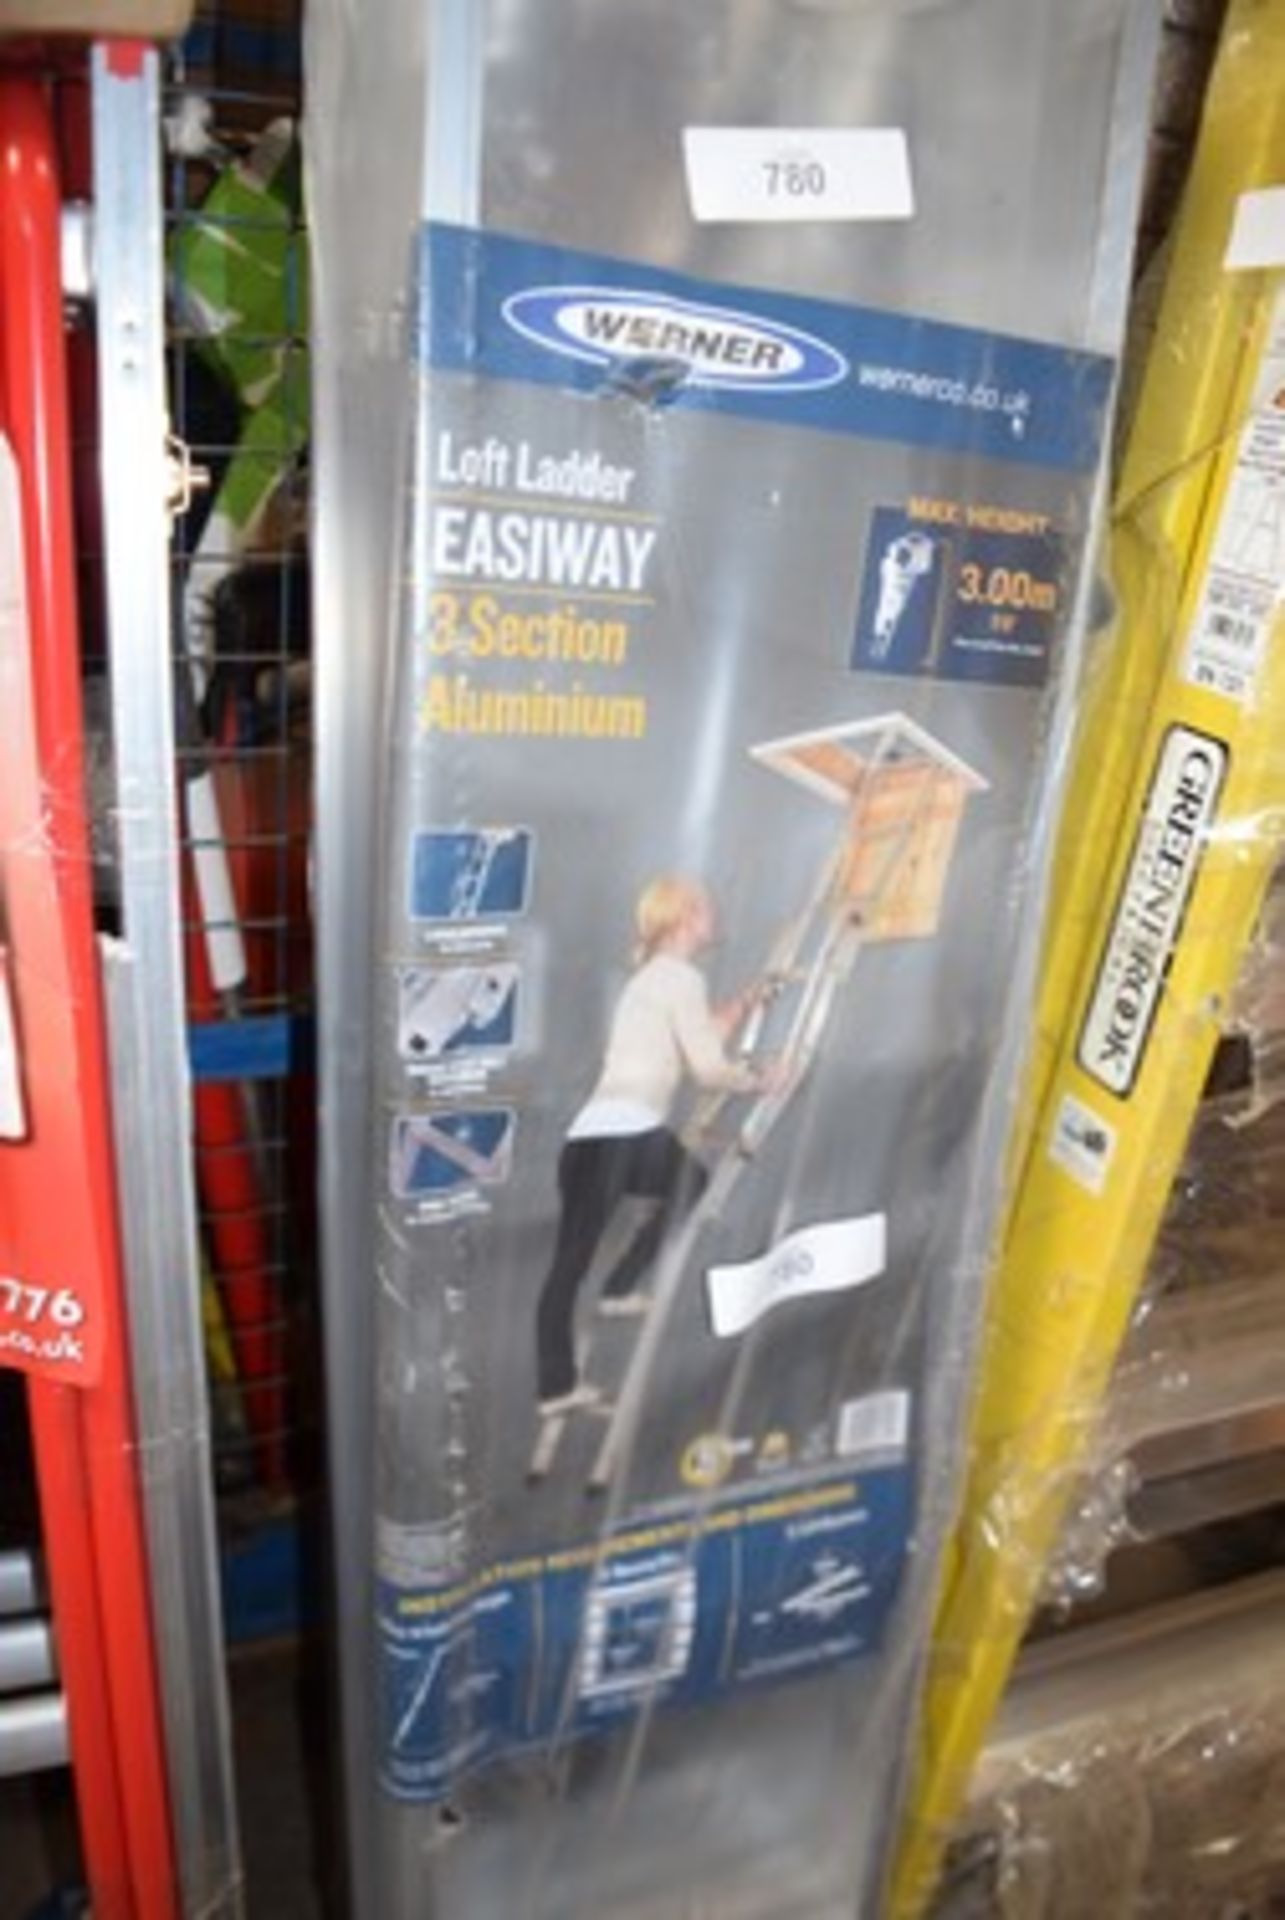 1 x Werner loft ladder, Easiway 3 section aluminium 3M max height - new (SW)